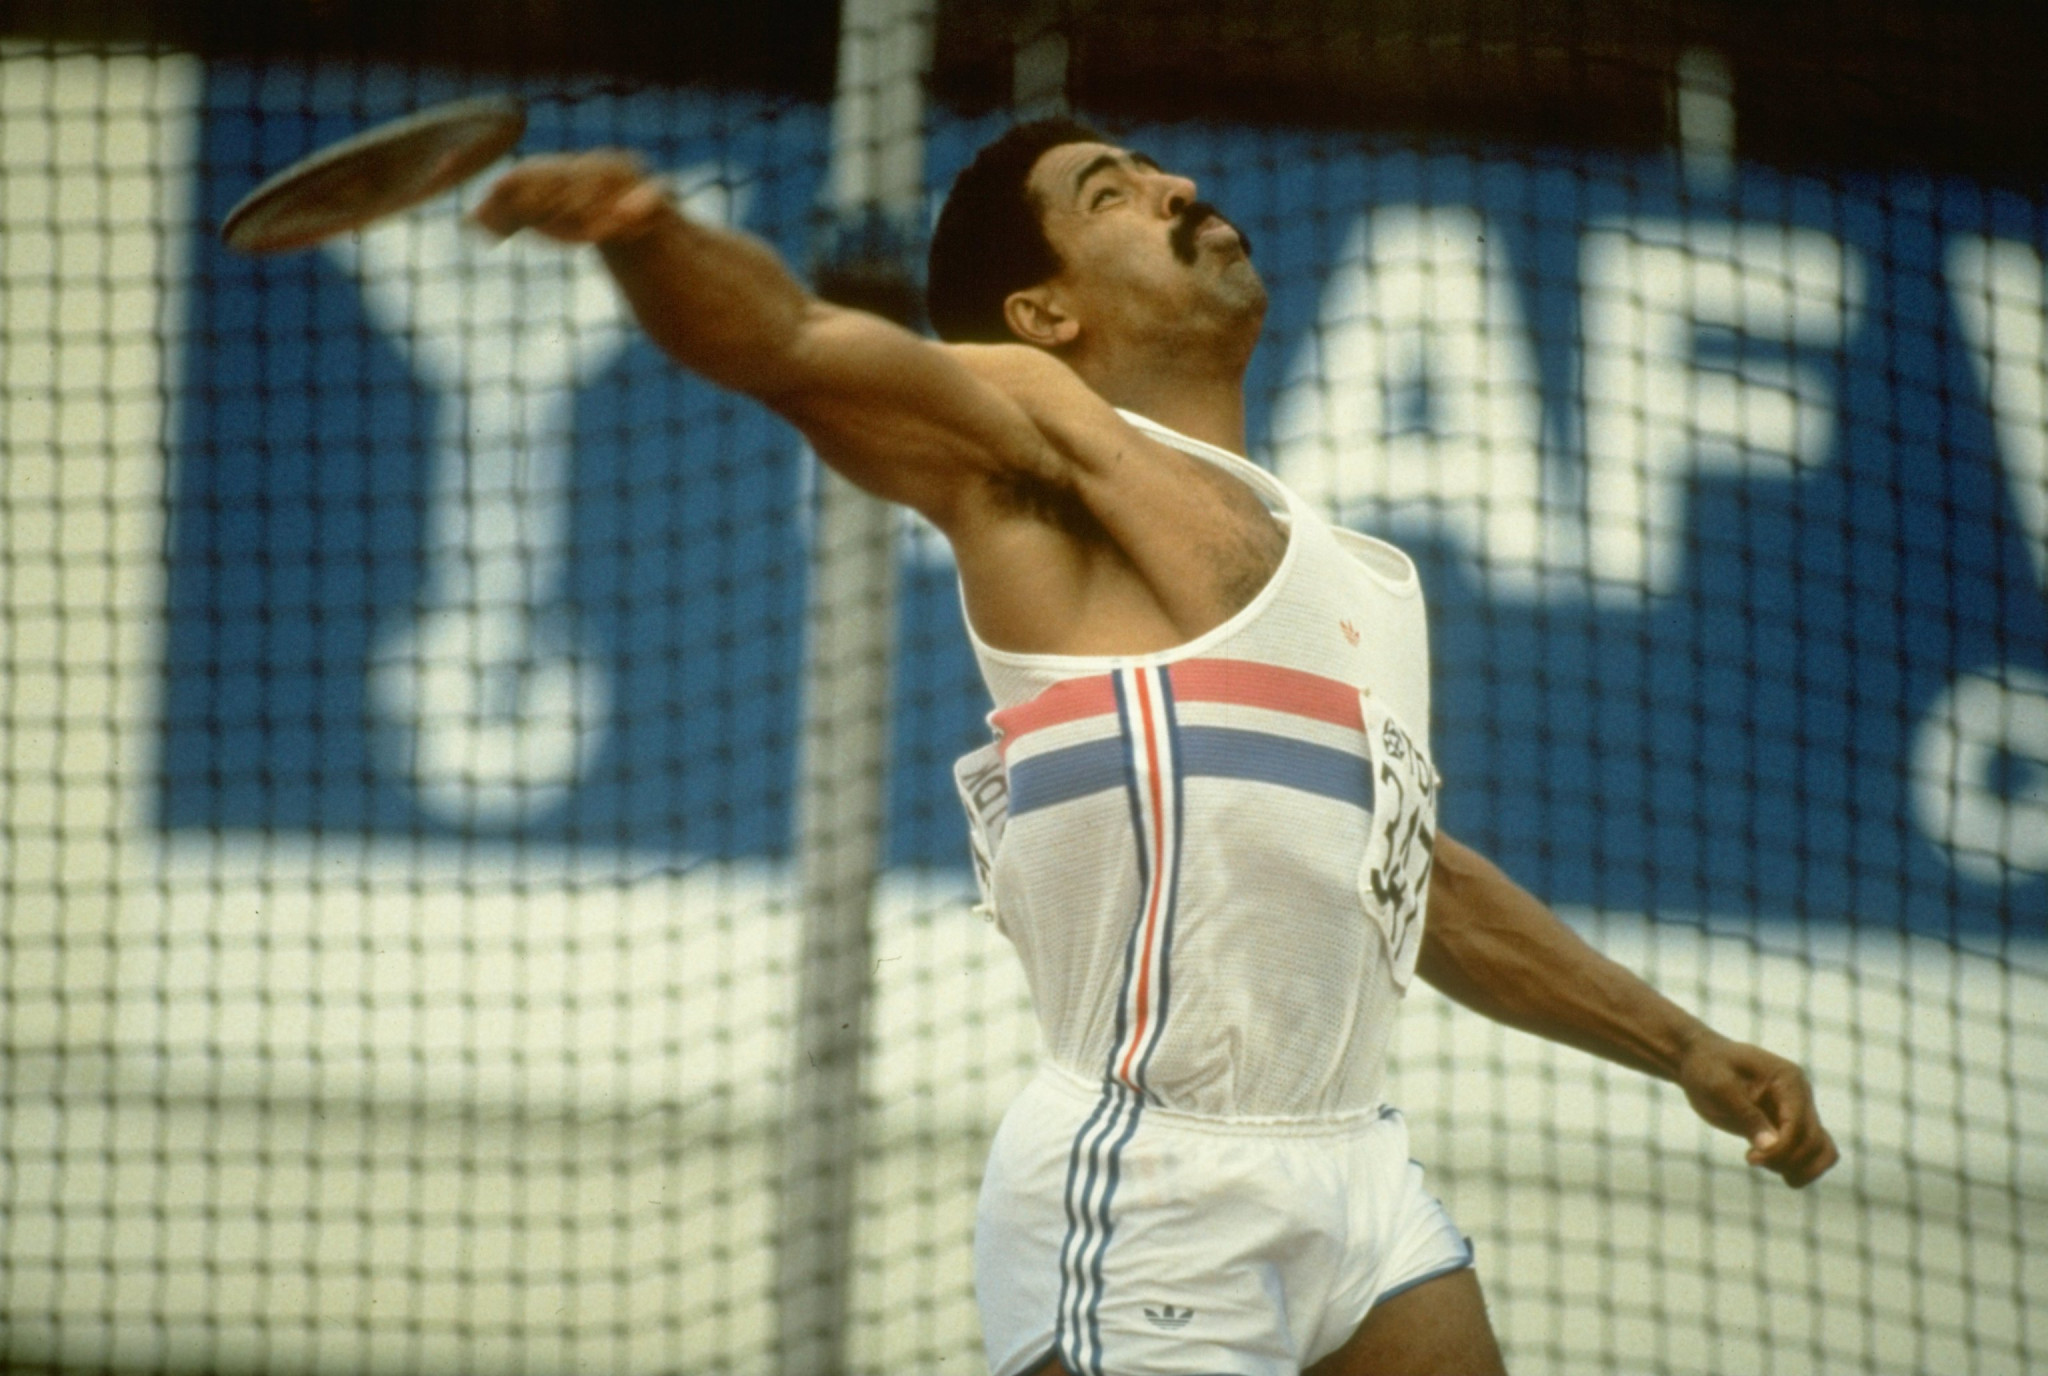 Britain's Daley Thompson won decathlon gold at the inaugural World Athletics Championships in Helsinki in 1983 ©Getty Images